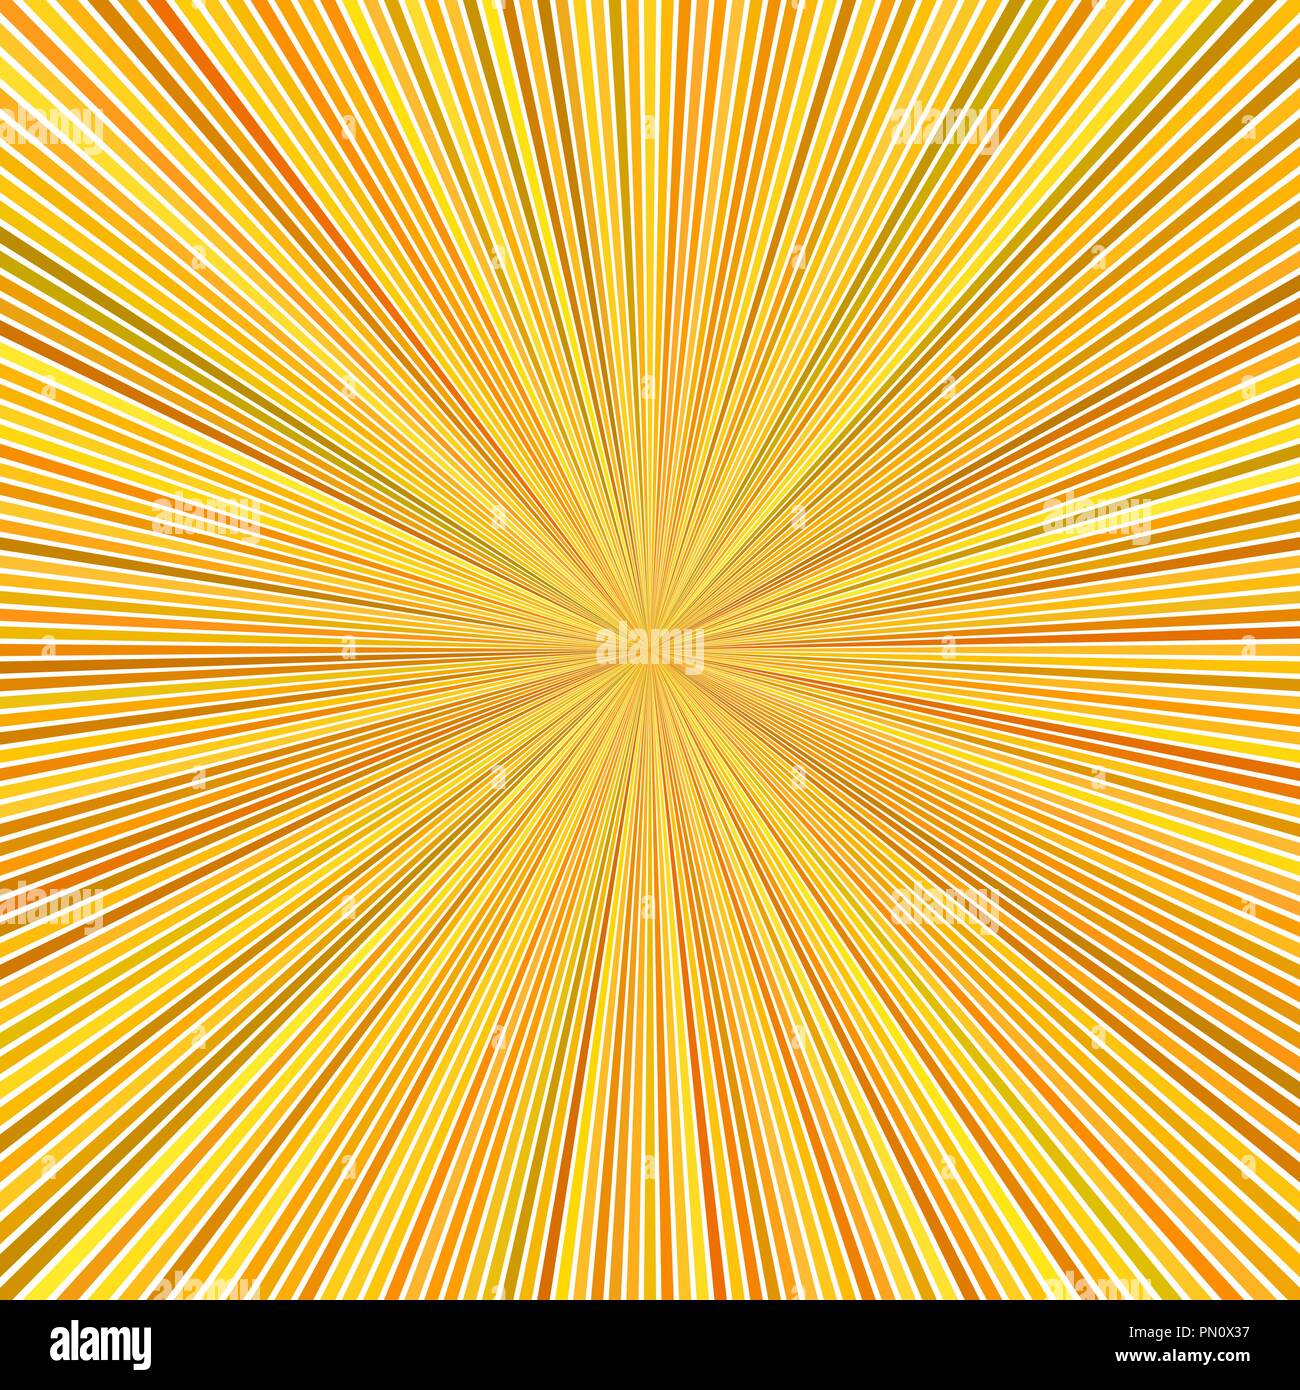 Orange psychedelic abstract explosion concept background - vector illustration Stock Vector